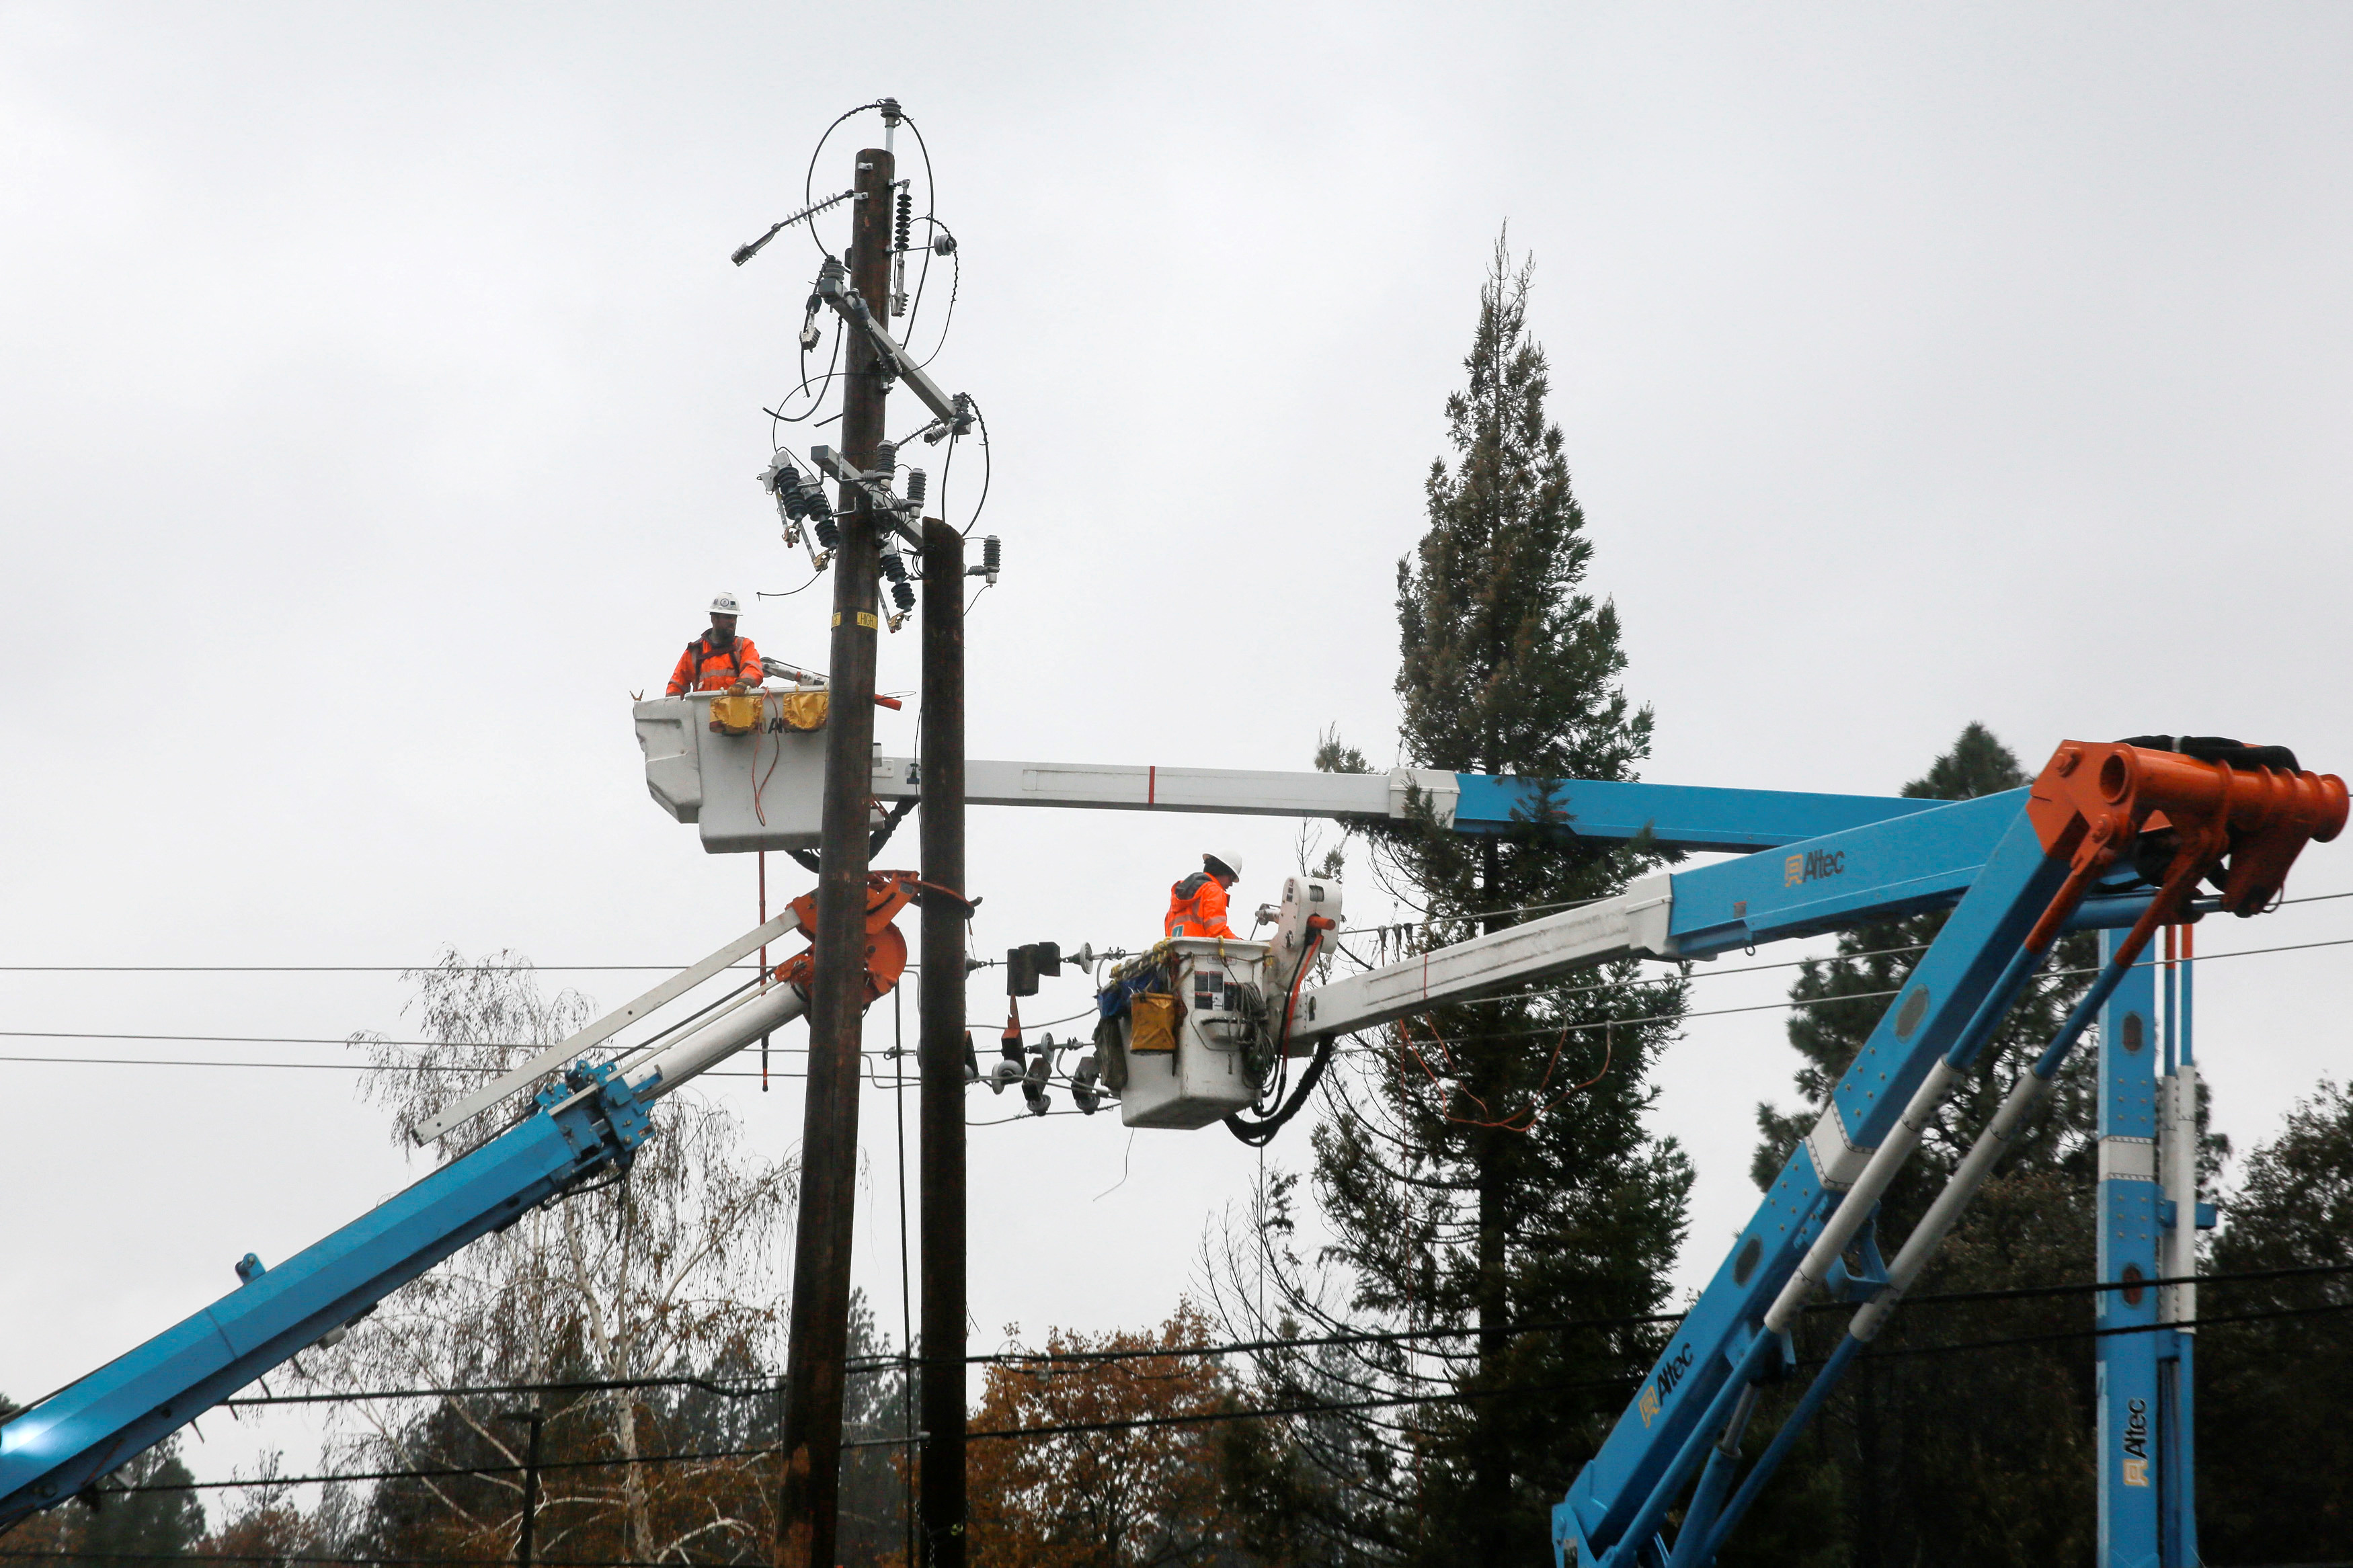 PG&E crew work on power lines to repair damage caused by the Camp Fire in Paradise,